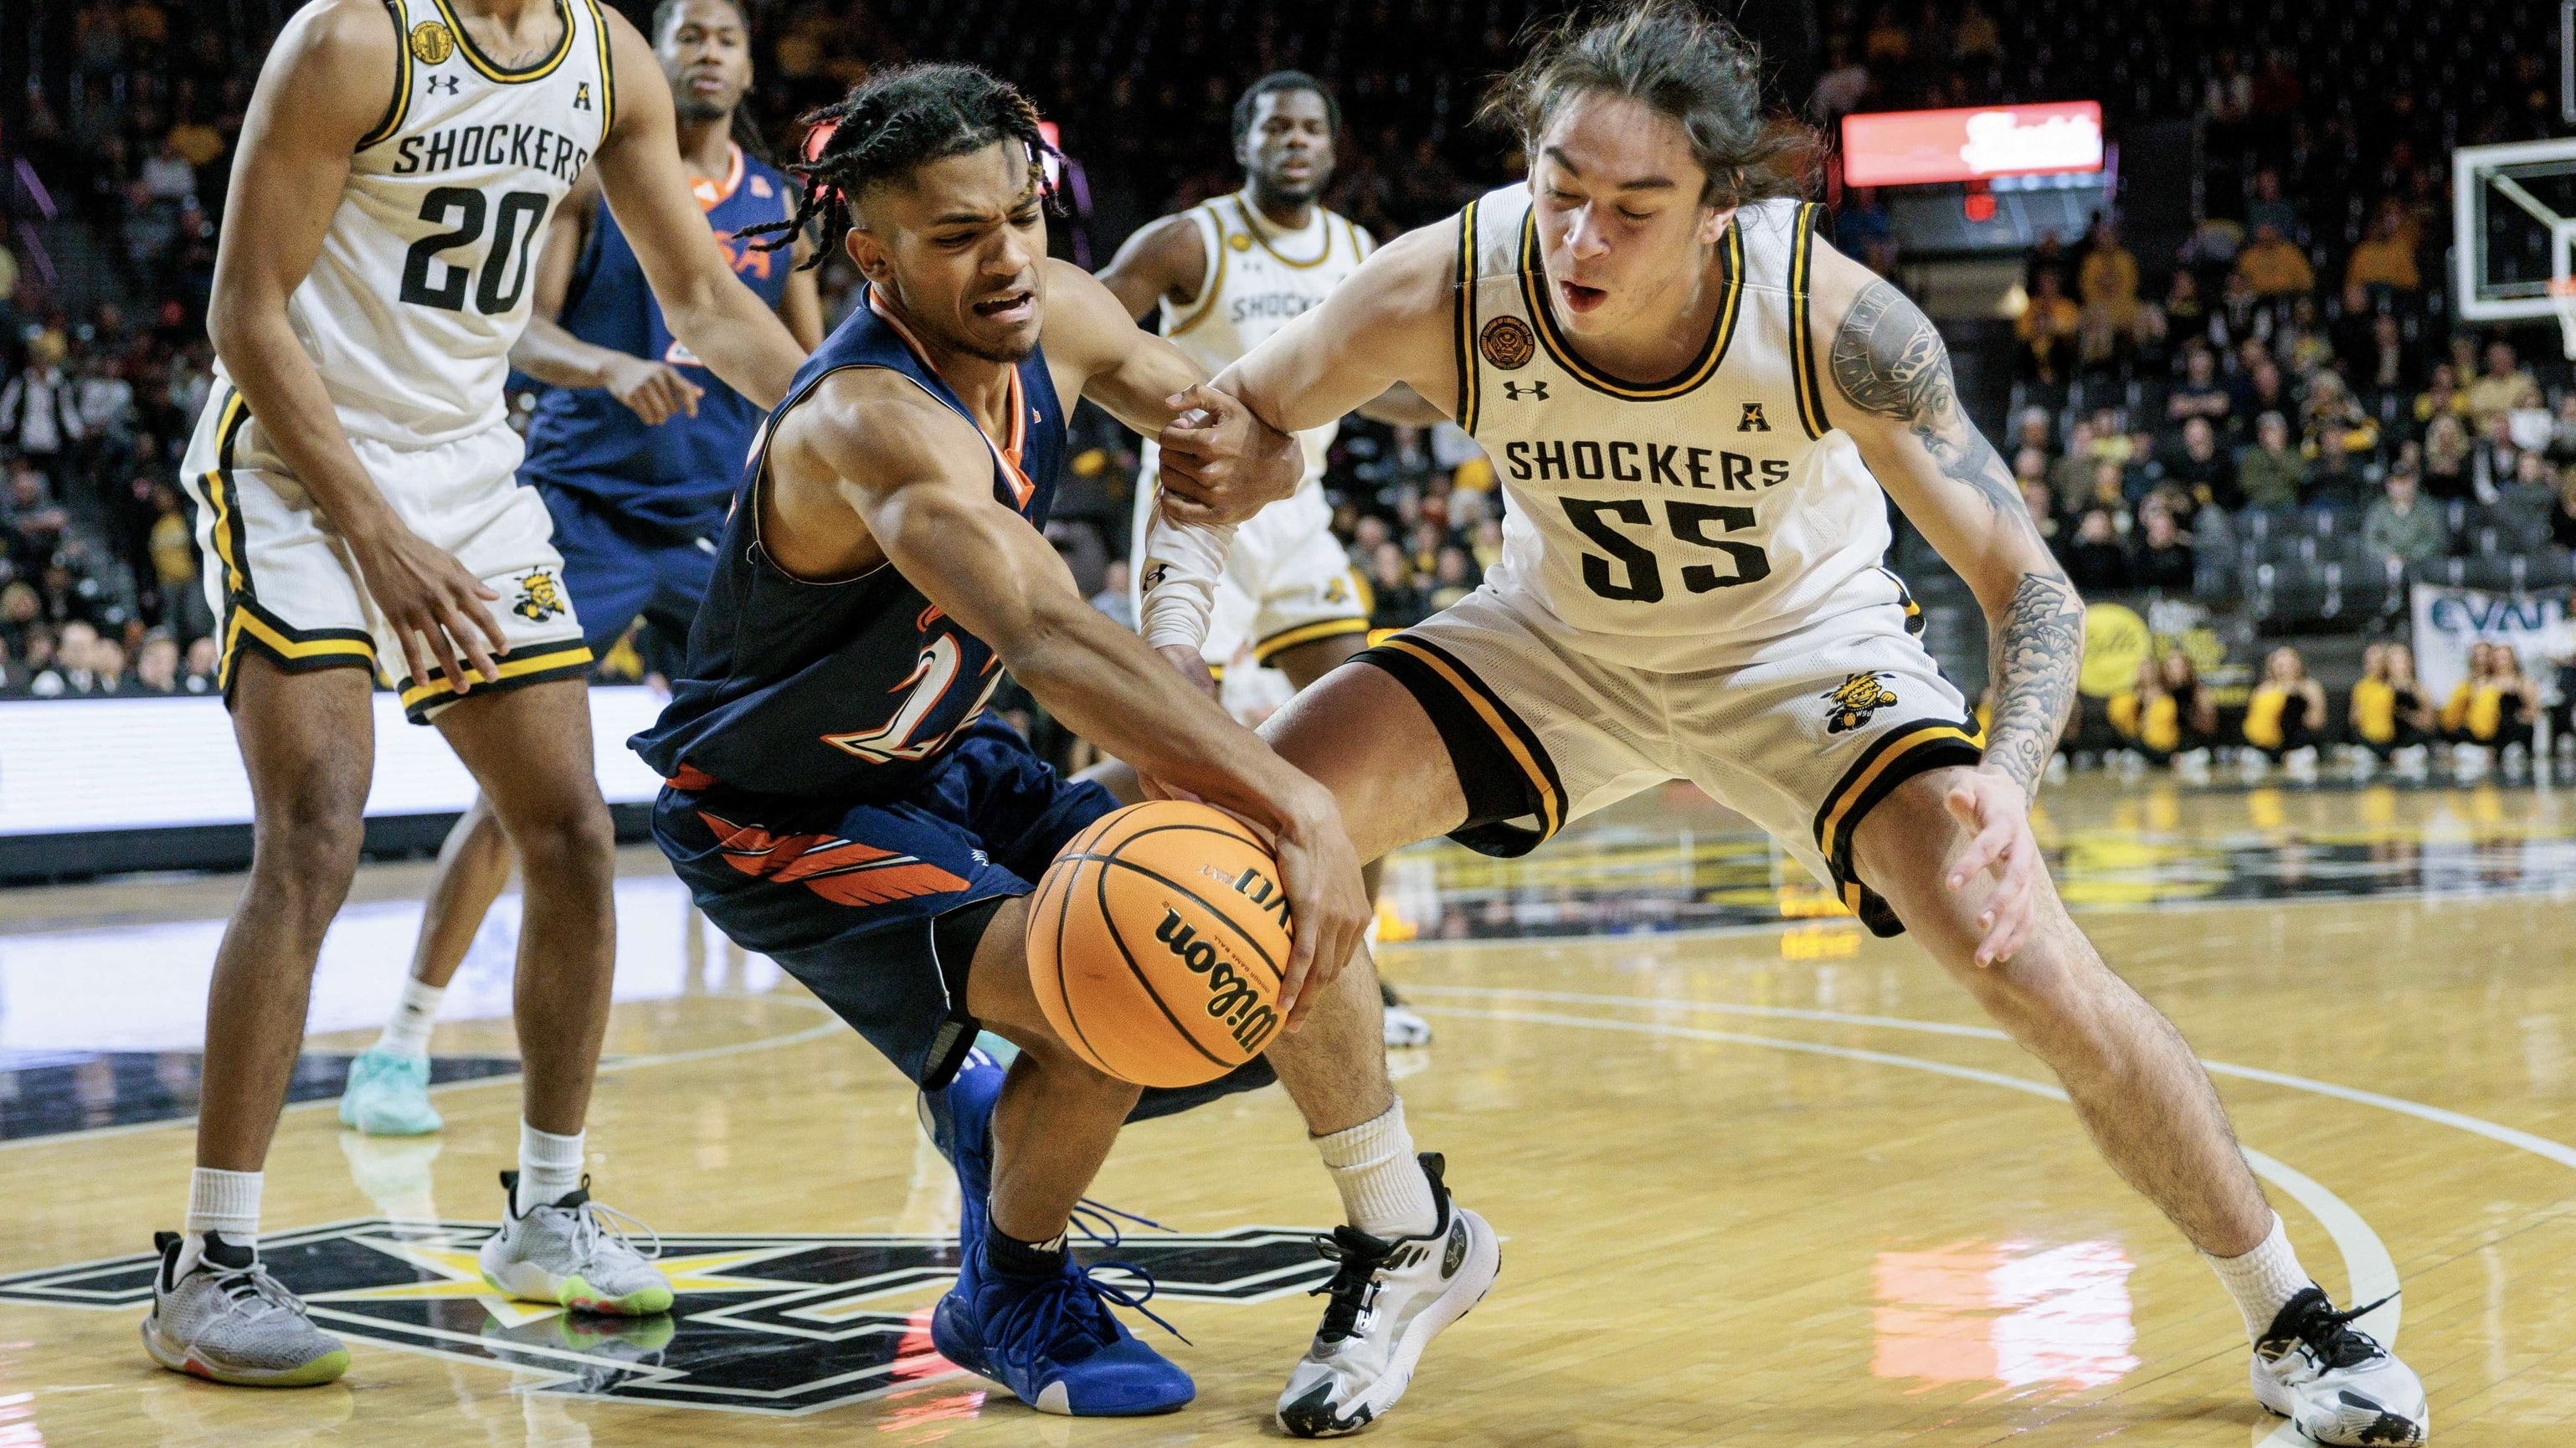 Christian Tucker tries to elude Wichita State defender